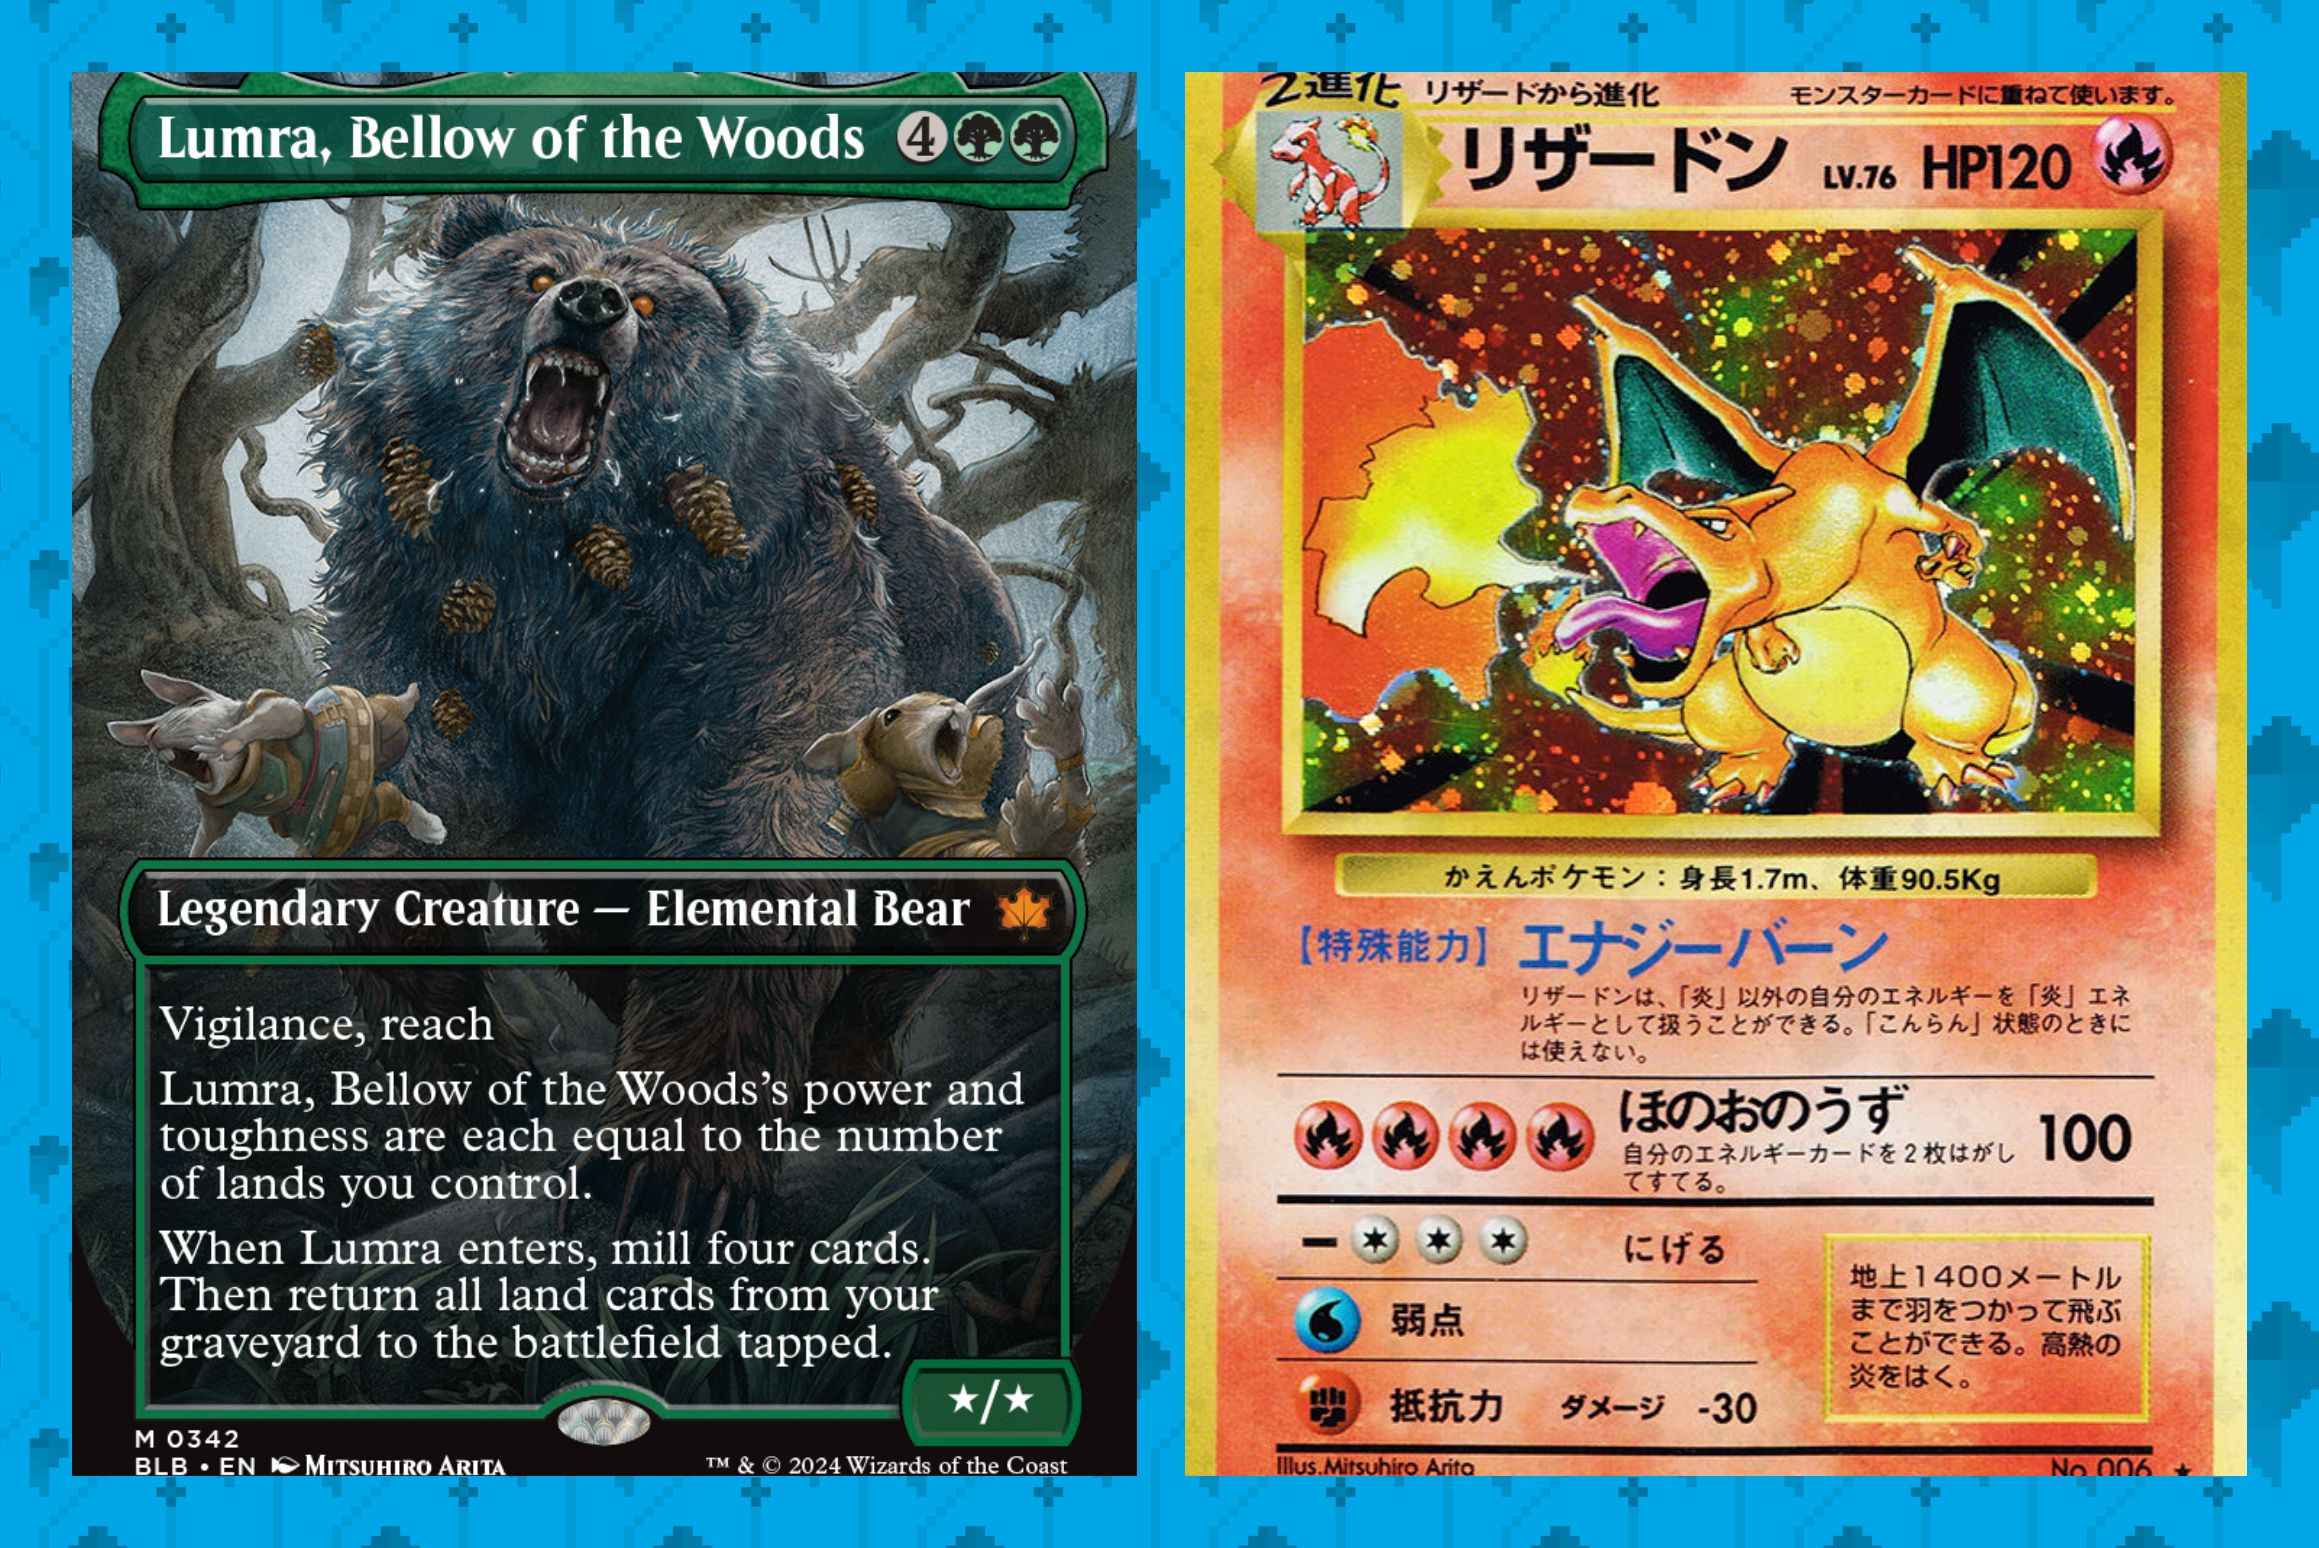 A graphic shows the card art for two cards, each with art drawn by Mitsuhiro Arita. The left shows a rampaging bear in Magic: The Gathering and the right shows Charizard from a retro set of Pokemon cards.